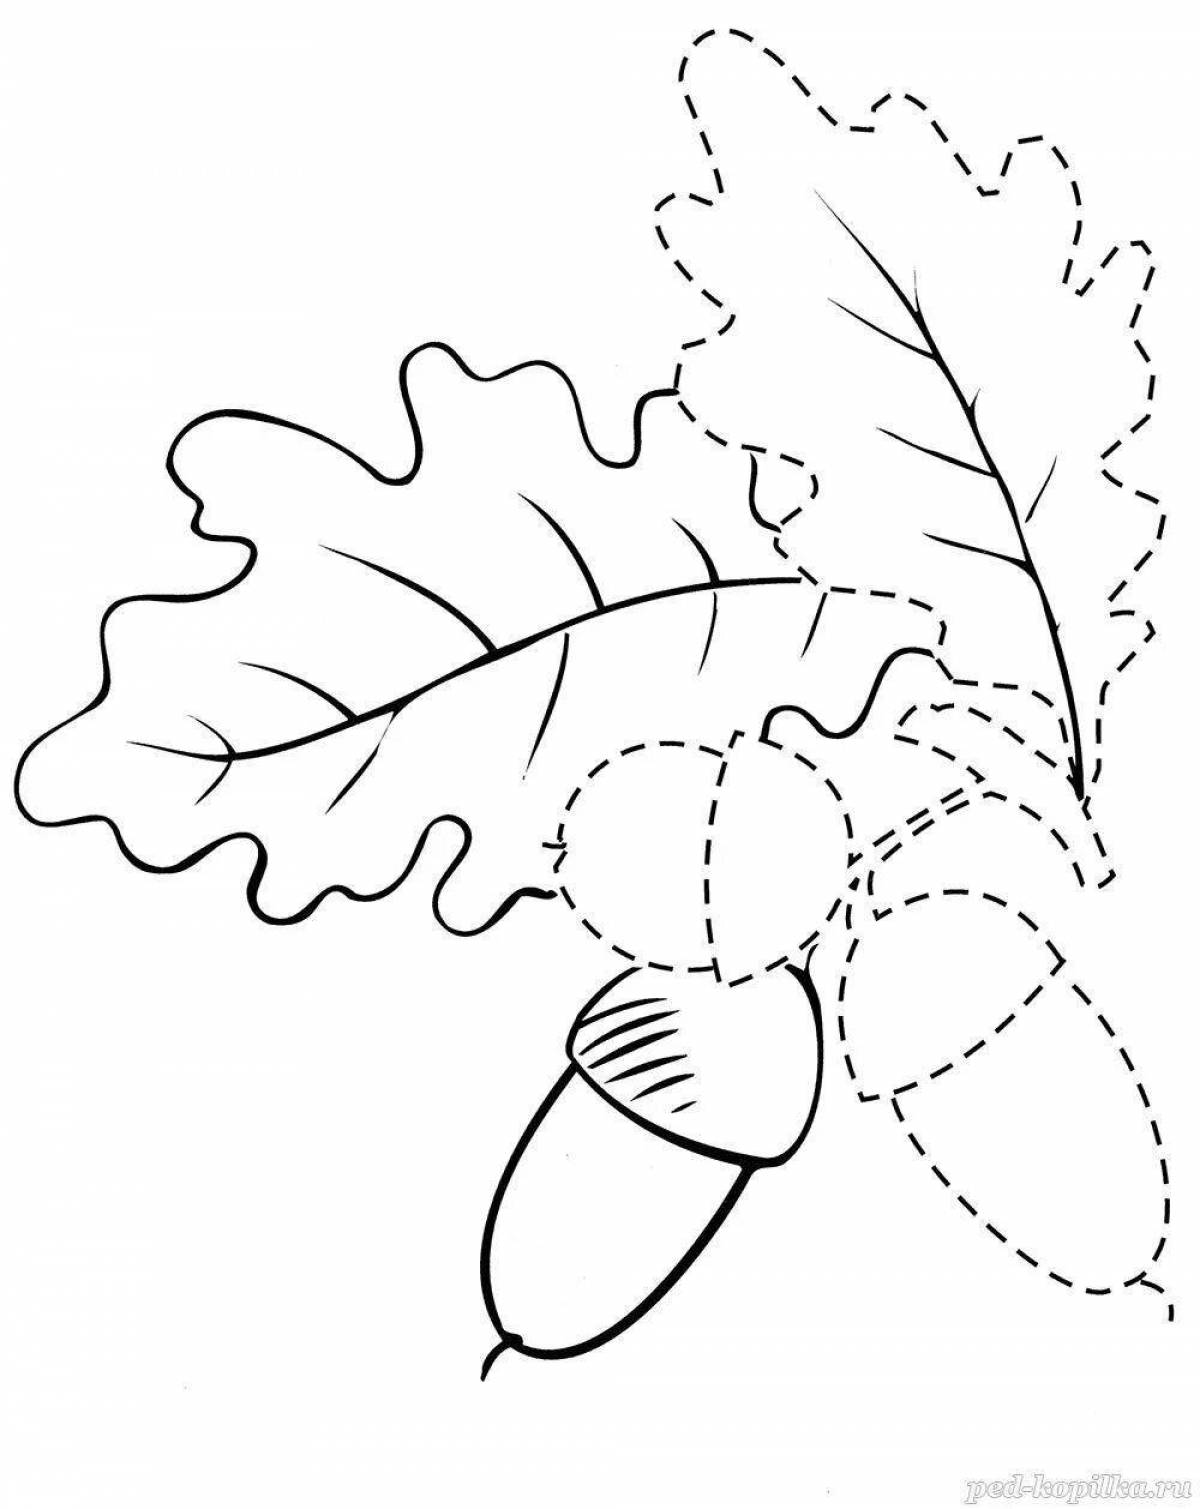 Great acorn coloring book for kids